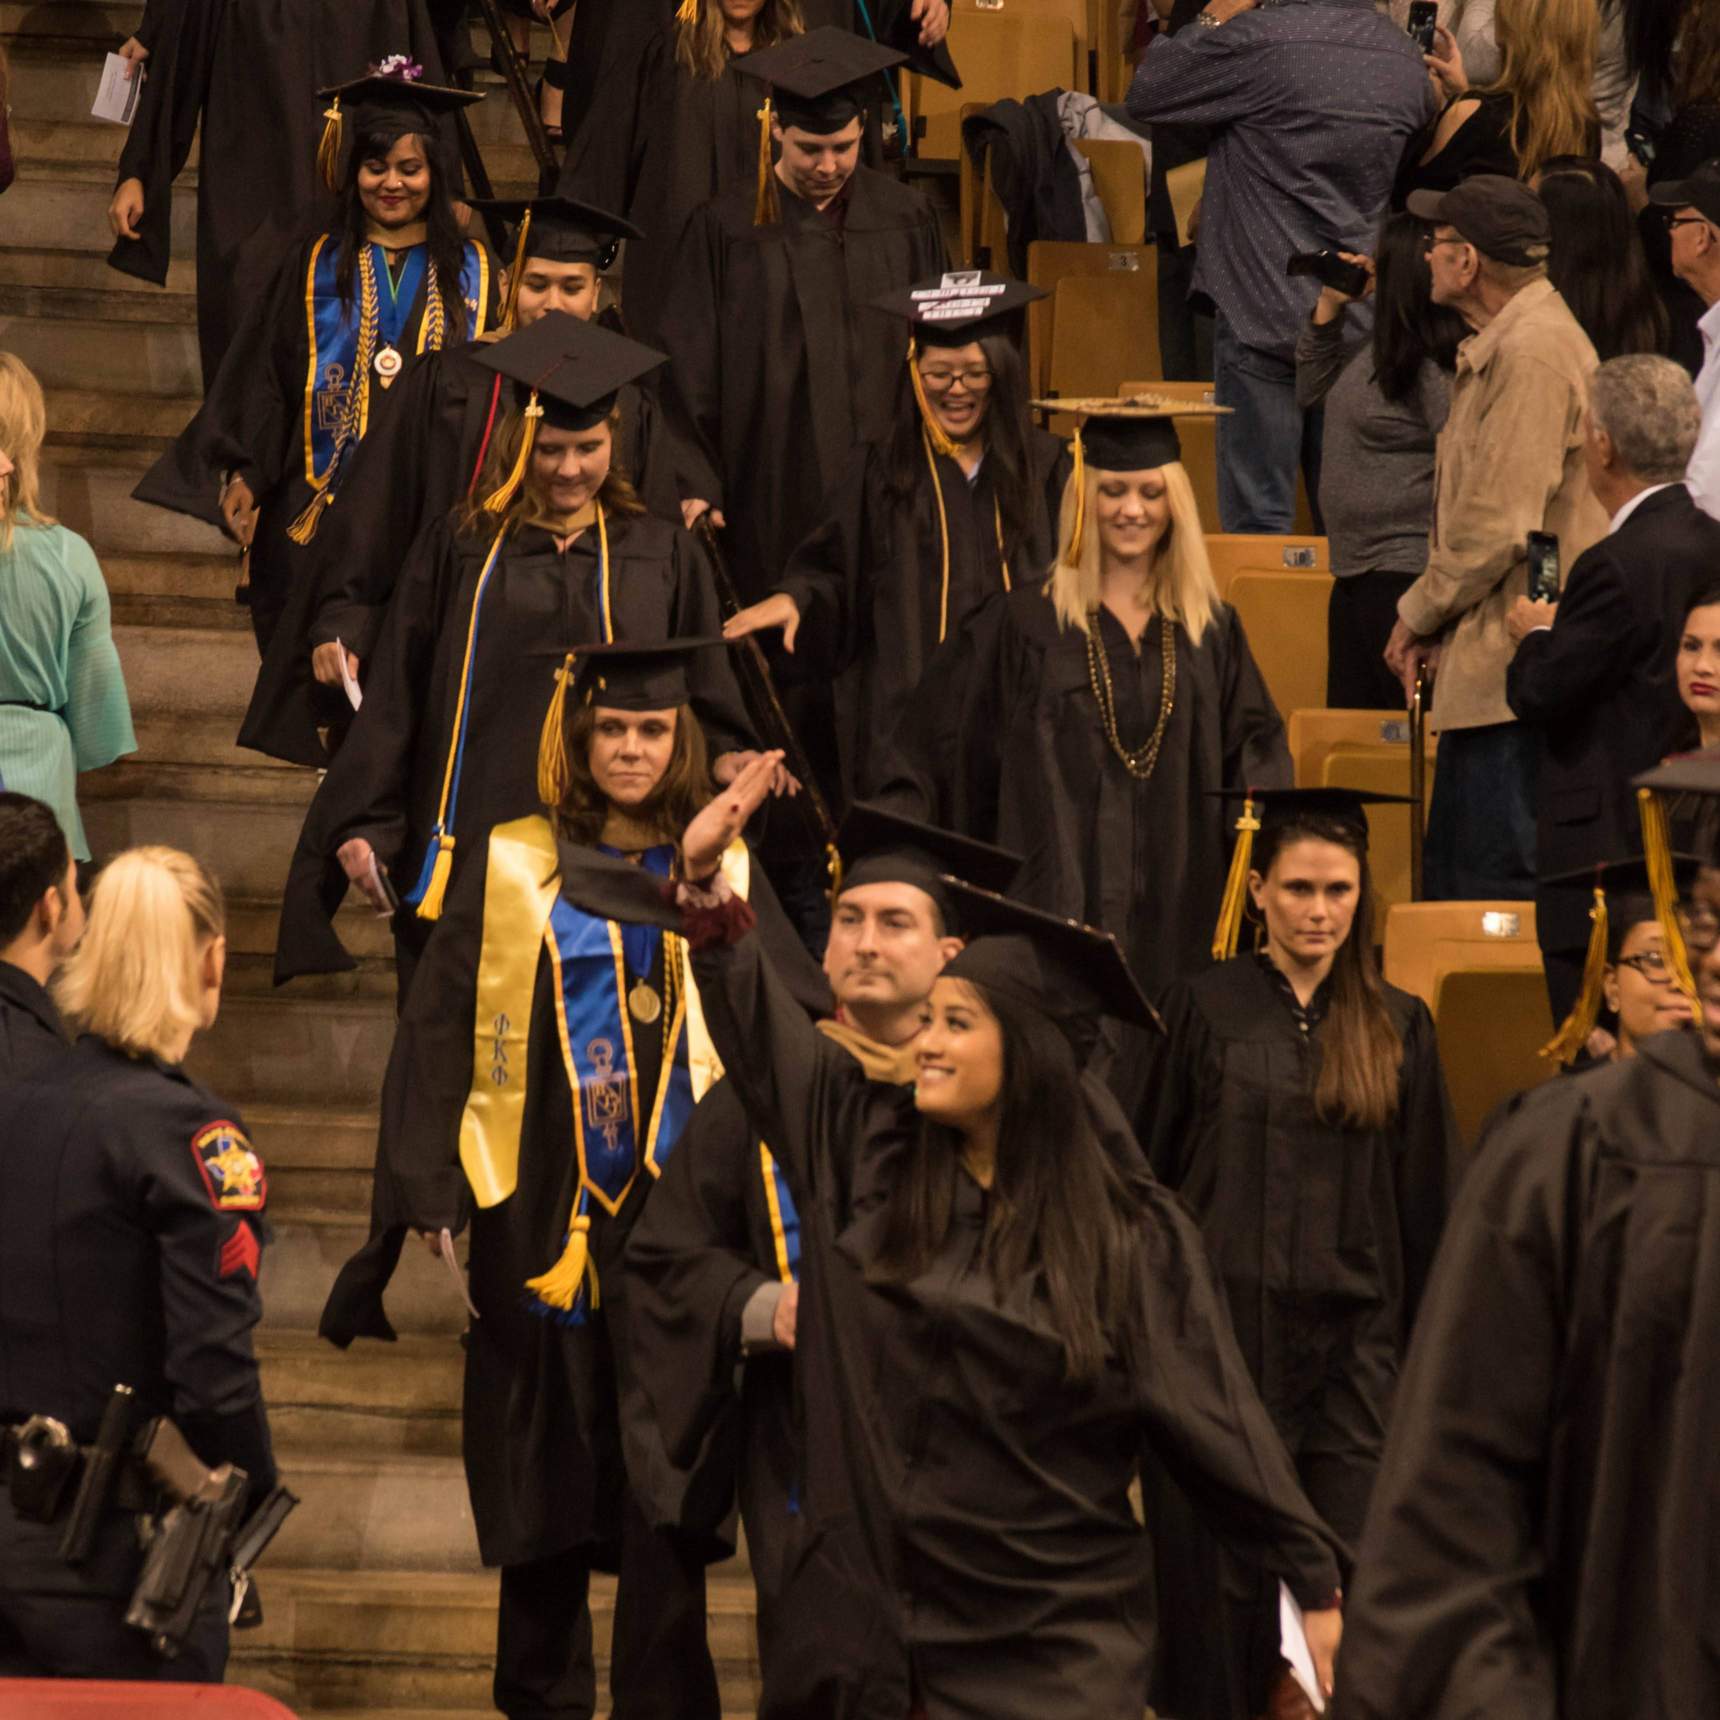 An enthused baccalaureate candidate waves to guest in the crowd